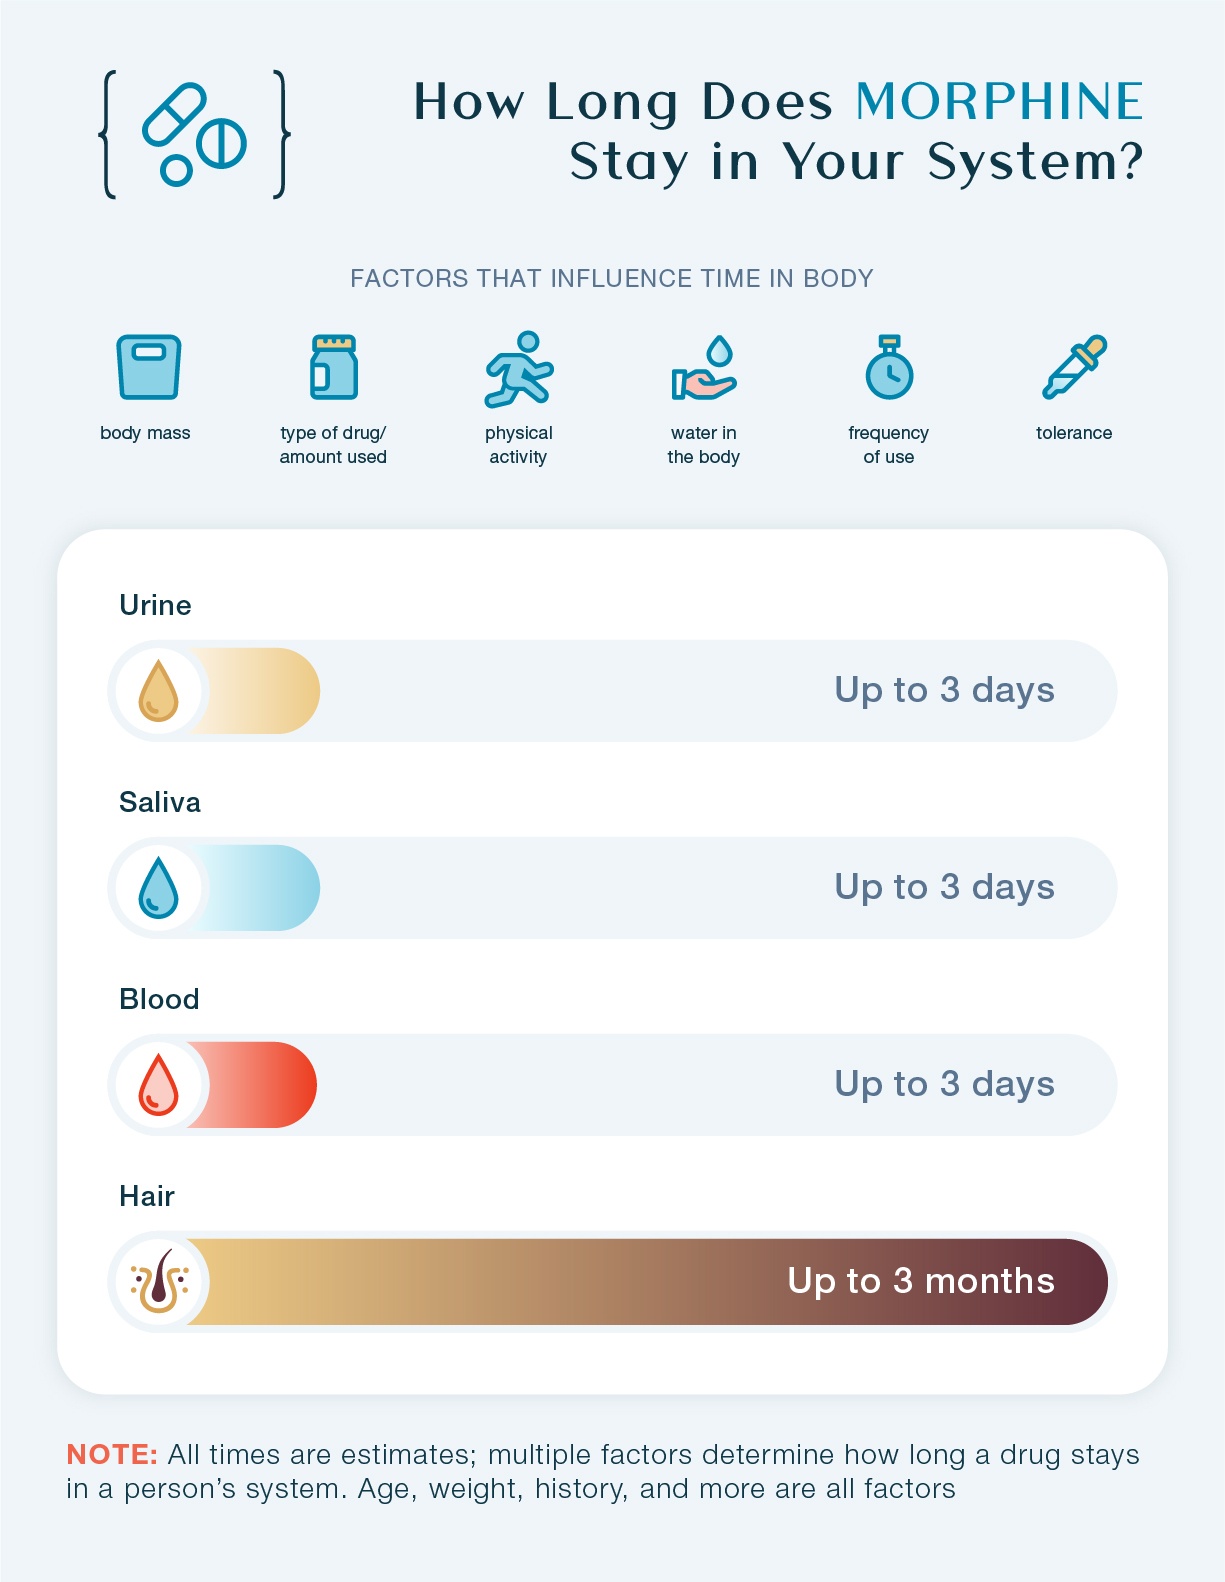 How long does Morphine stay in your system? This chart shows how long Morphine stays in urine, saliva, blood, and hair